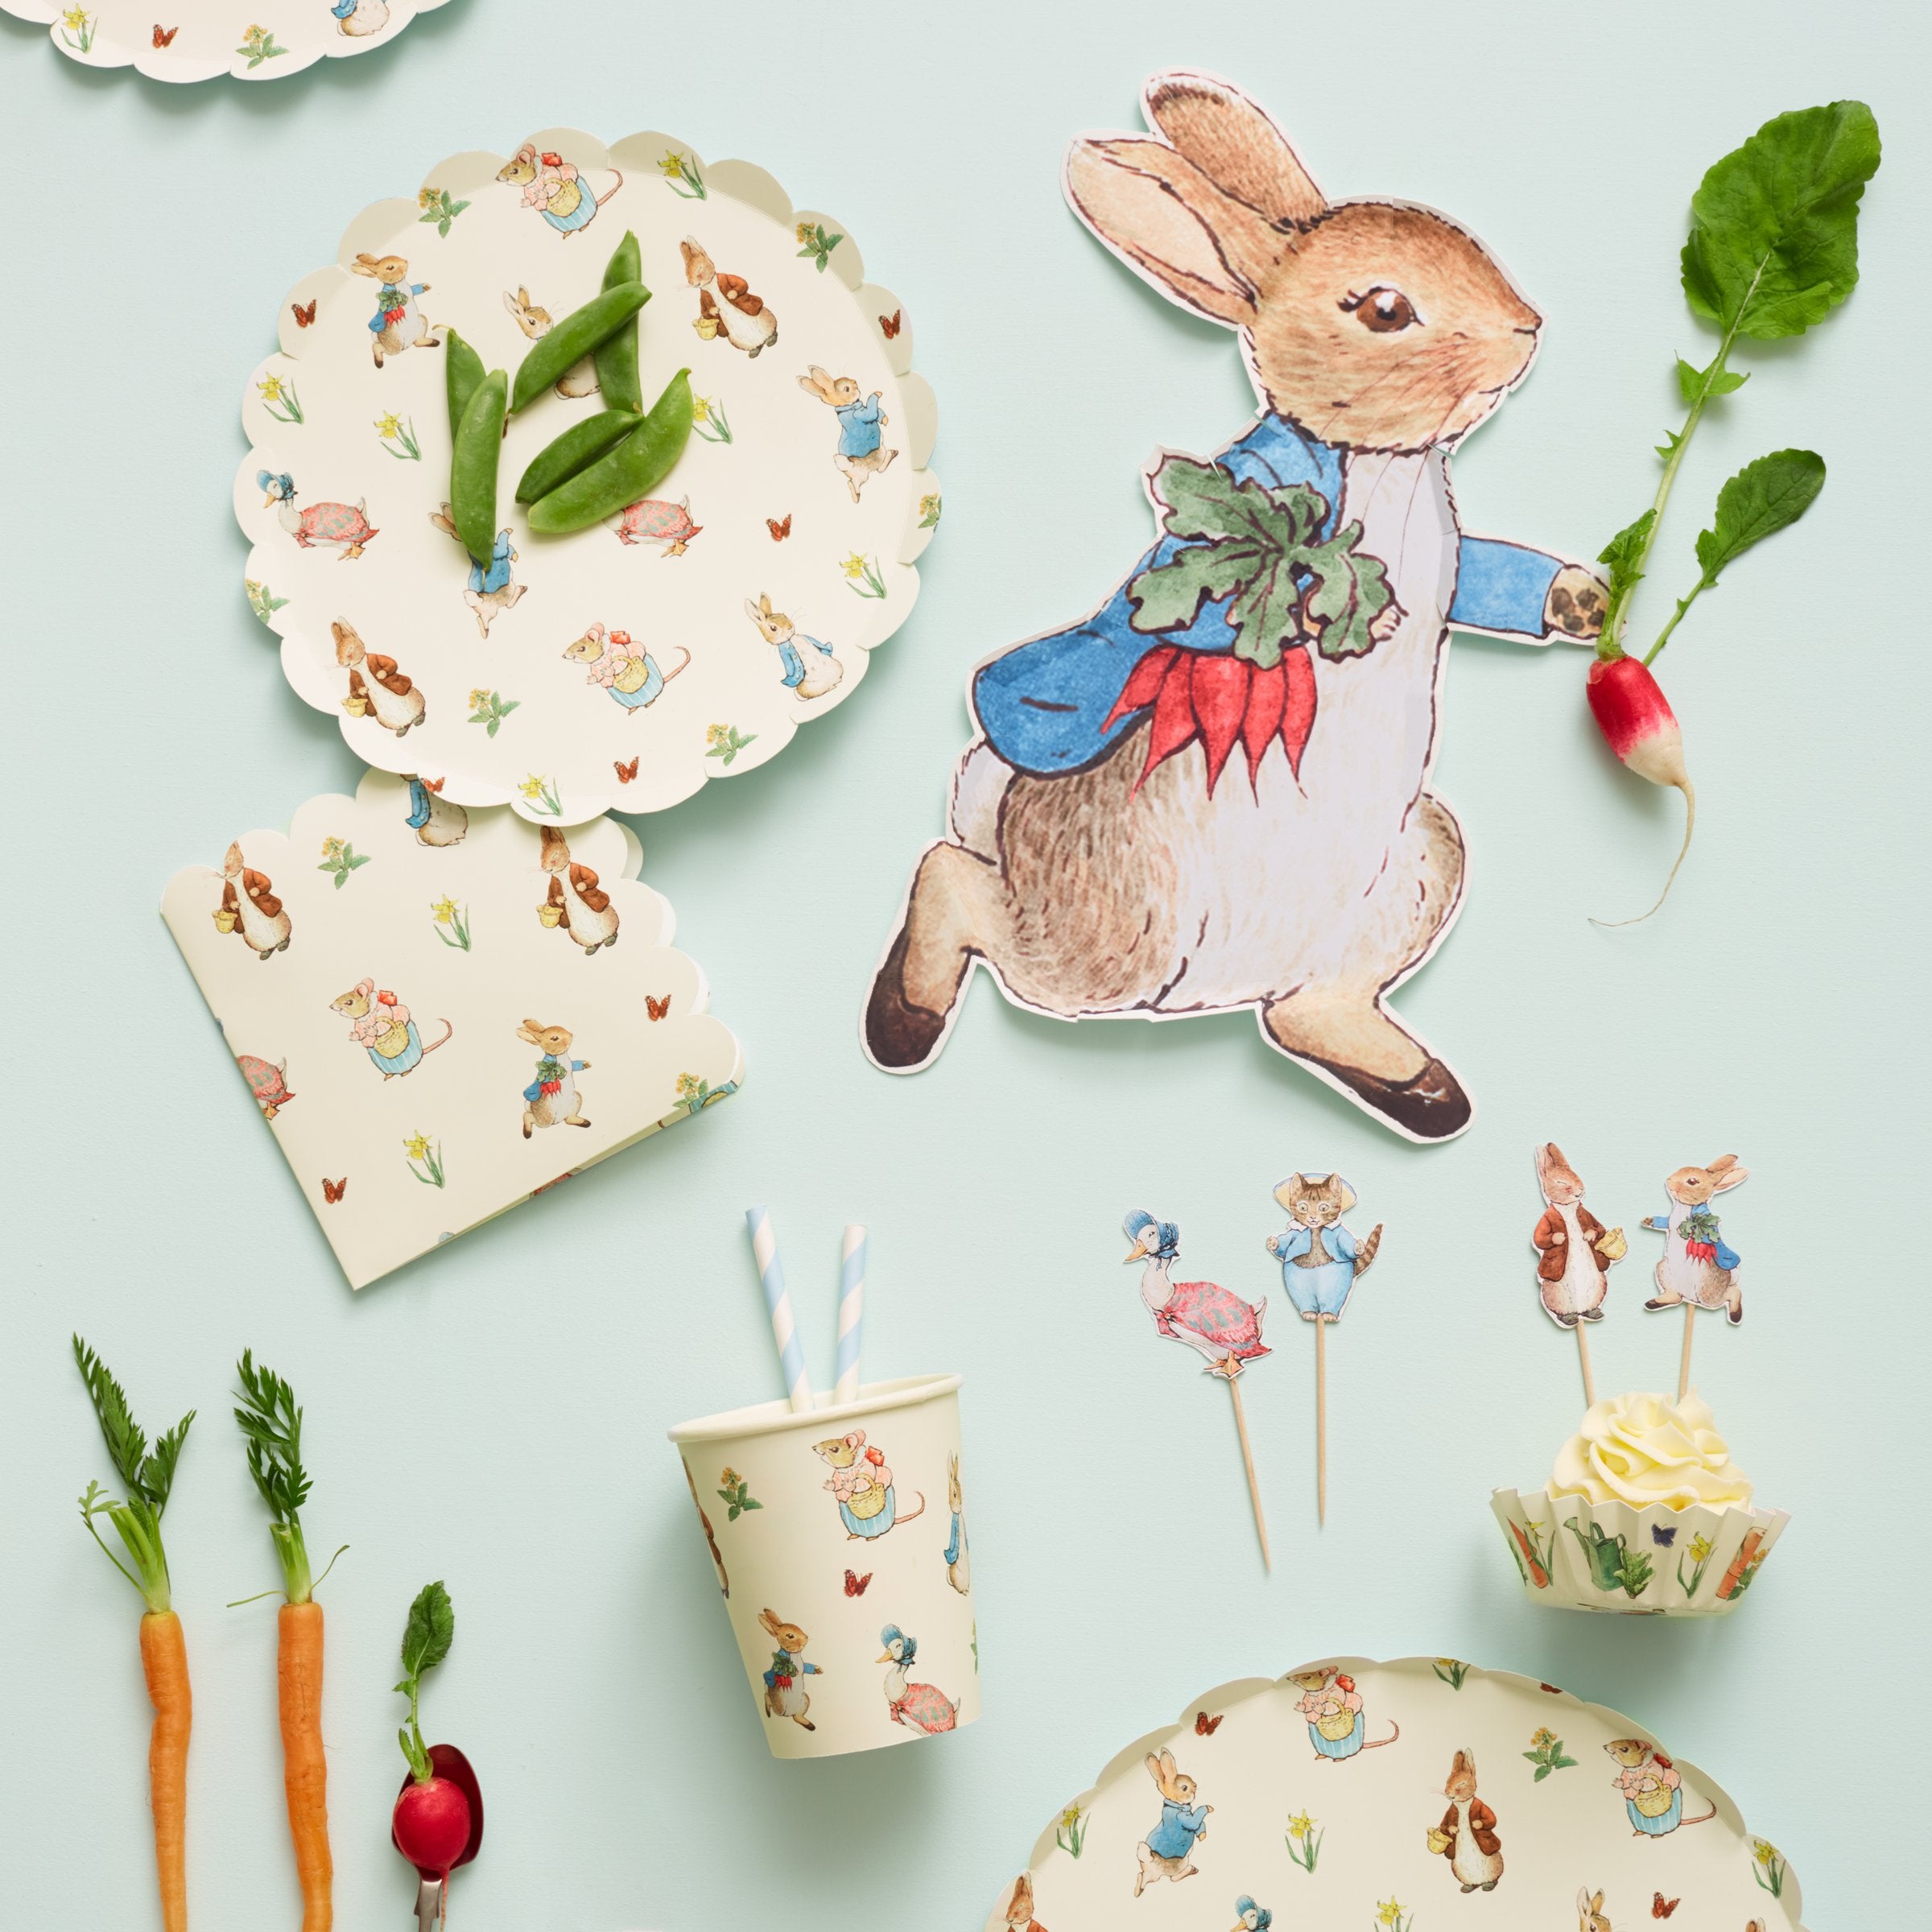 These plates are crafted from high quality paper, in the shape of Peter Rabbit clutching a handful of radishes.